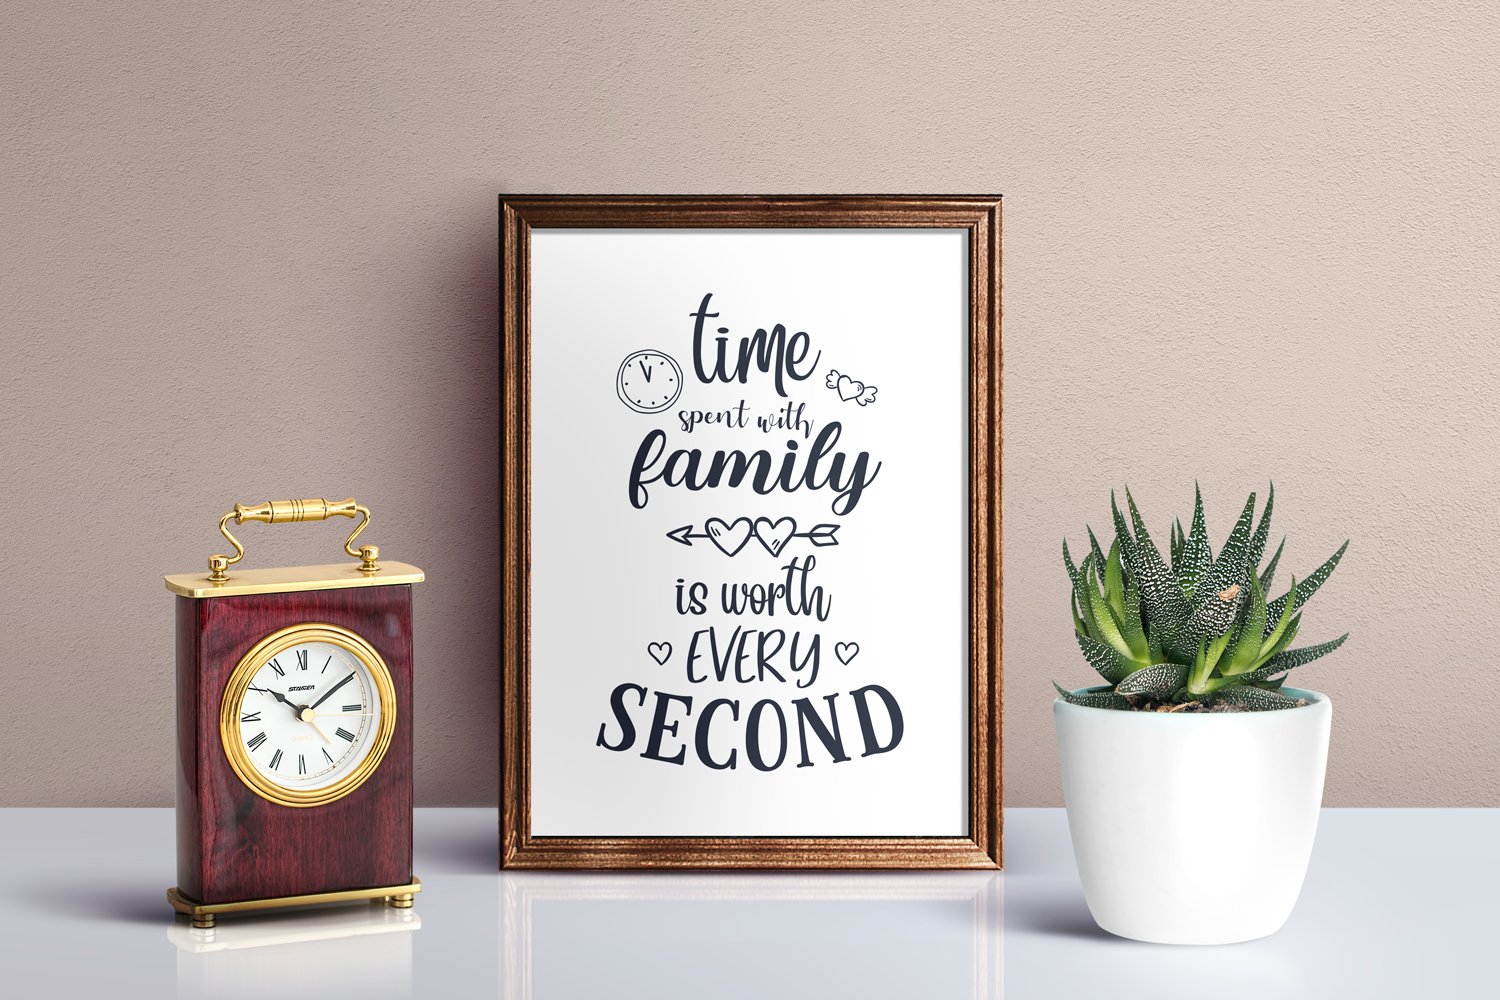 Nice poster with wooden frame and family quote.